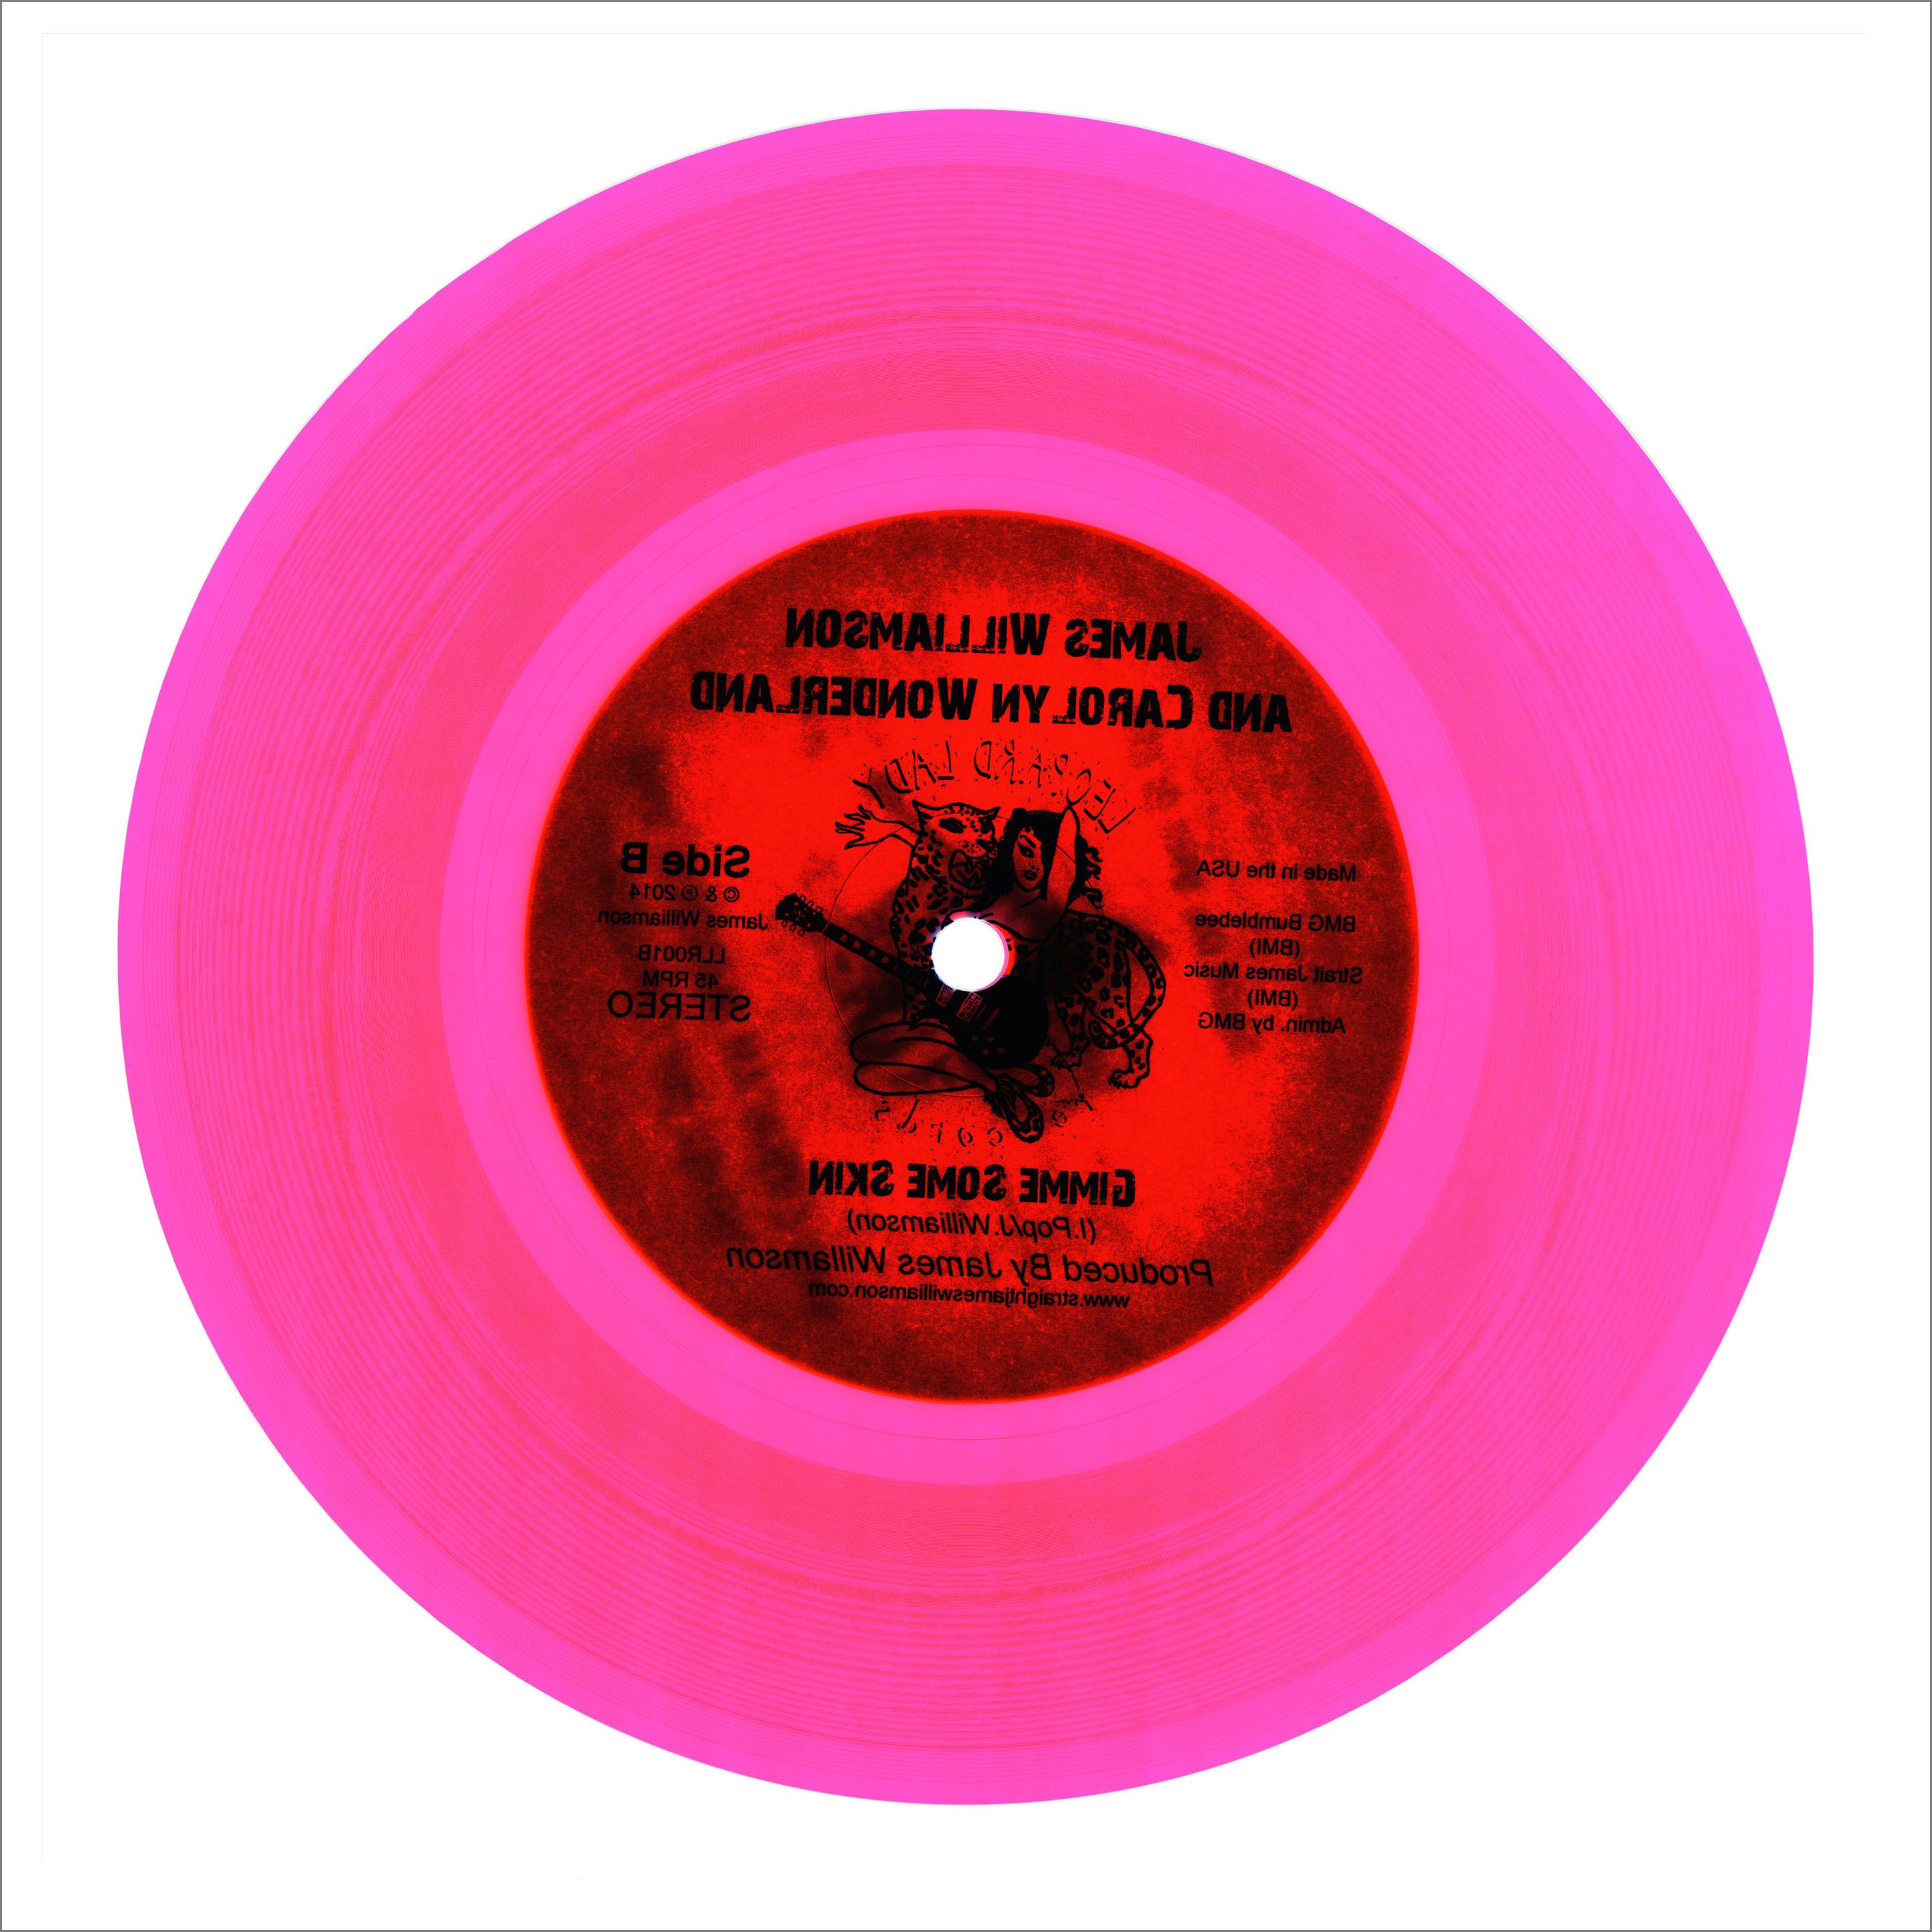 Heidler & Heeps Print - B Side Vinyl Collection, Made in the USA (Pink) - Pop Art Color Photogrpahy